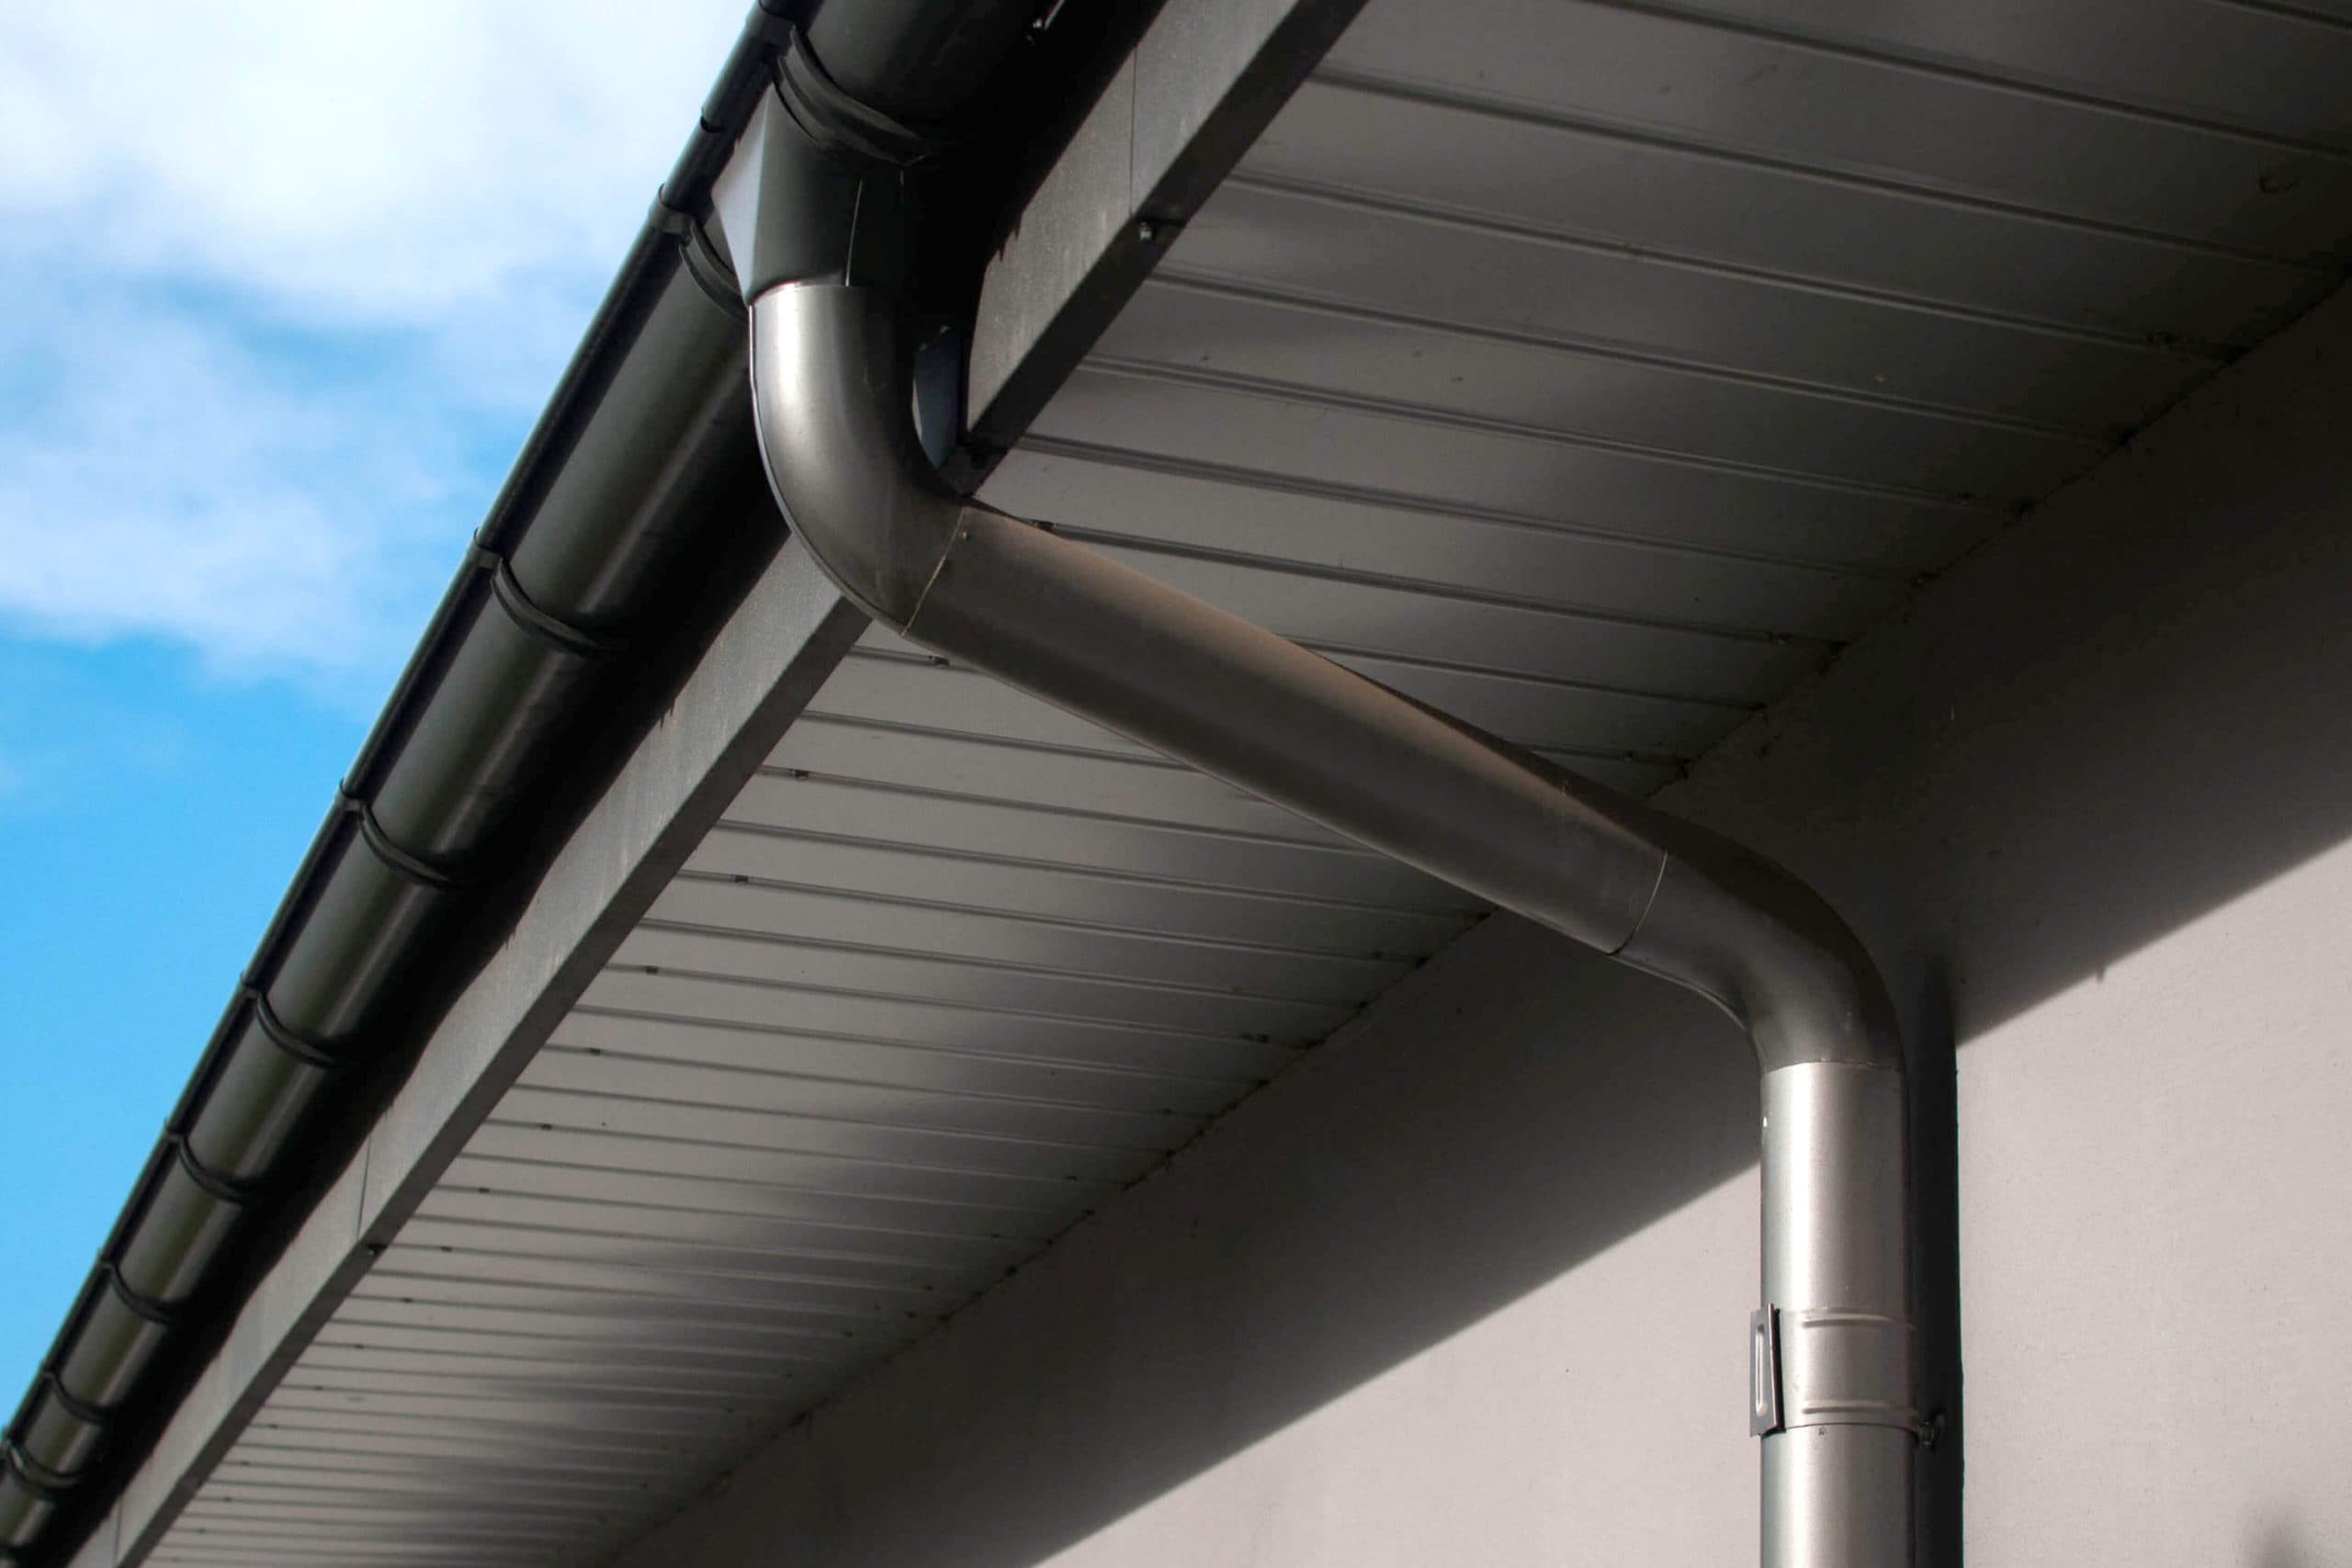 Reliable and affordable Galvanized gutters installation in Cincinnati